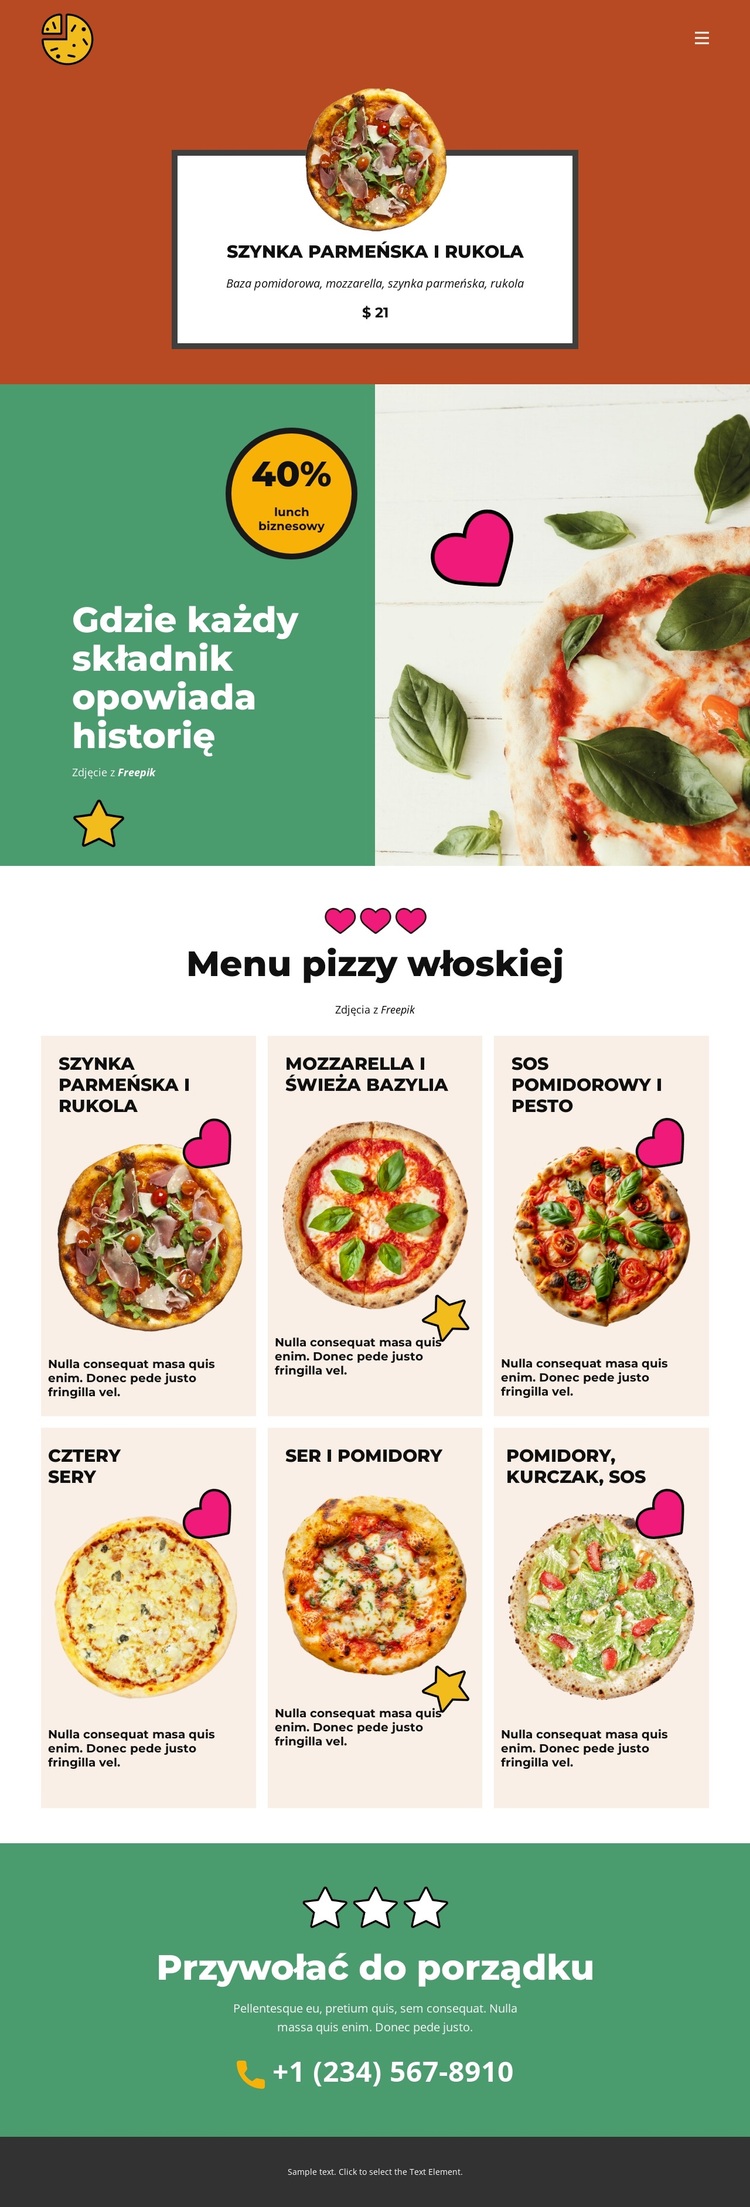 Fun Facts about Pizza Motyw WordPress